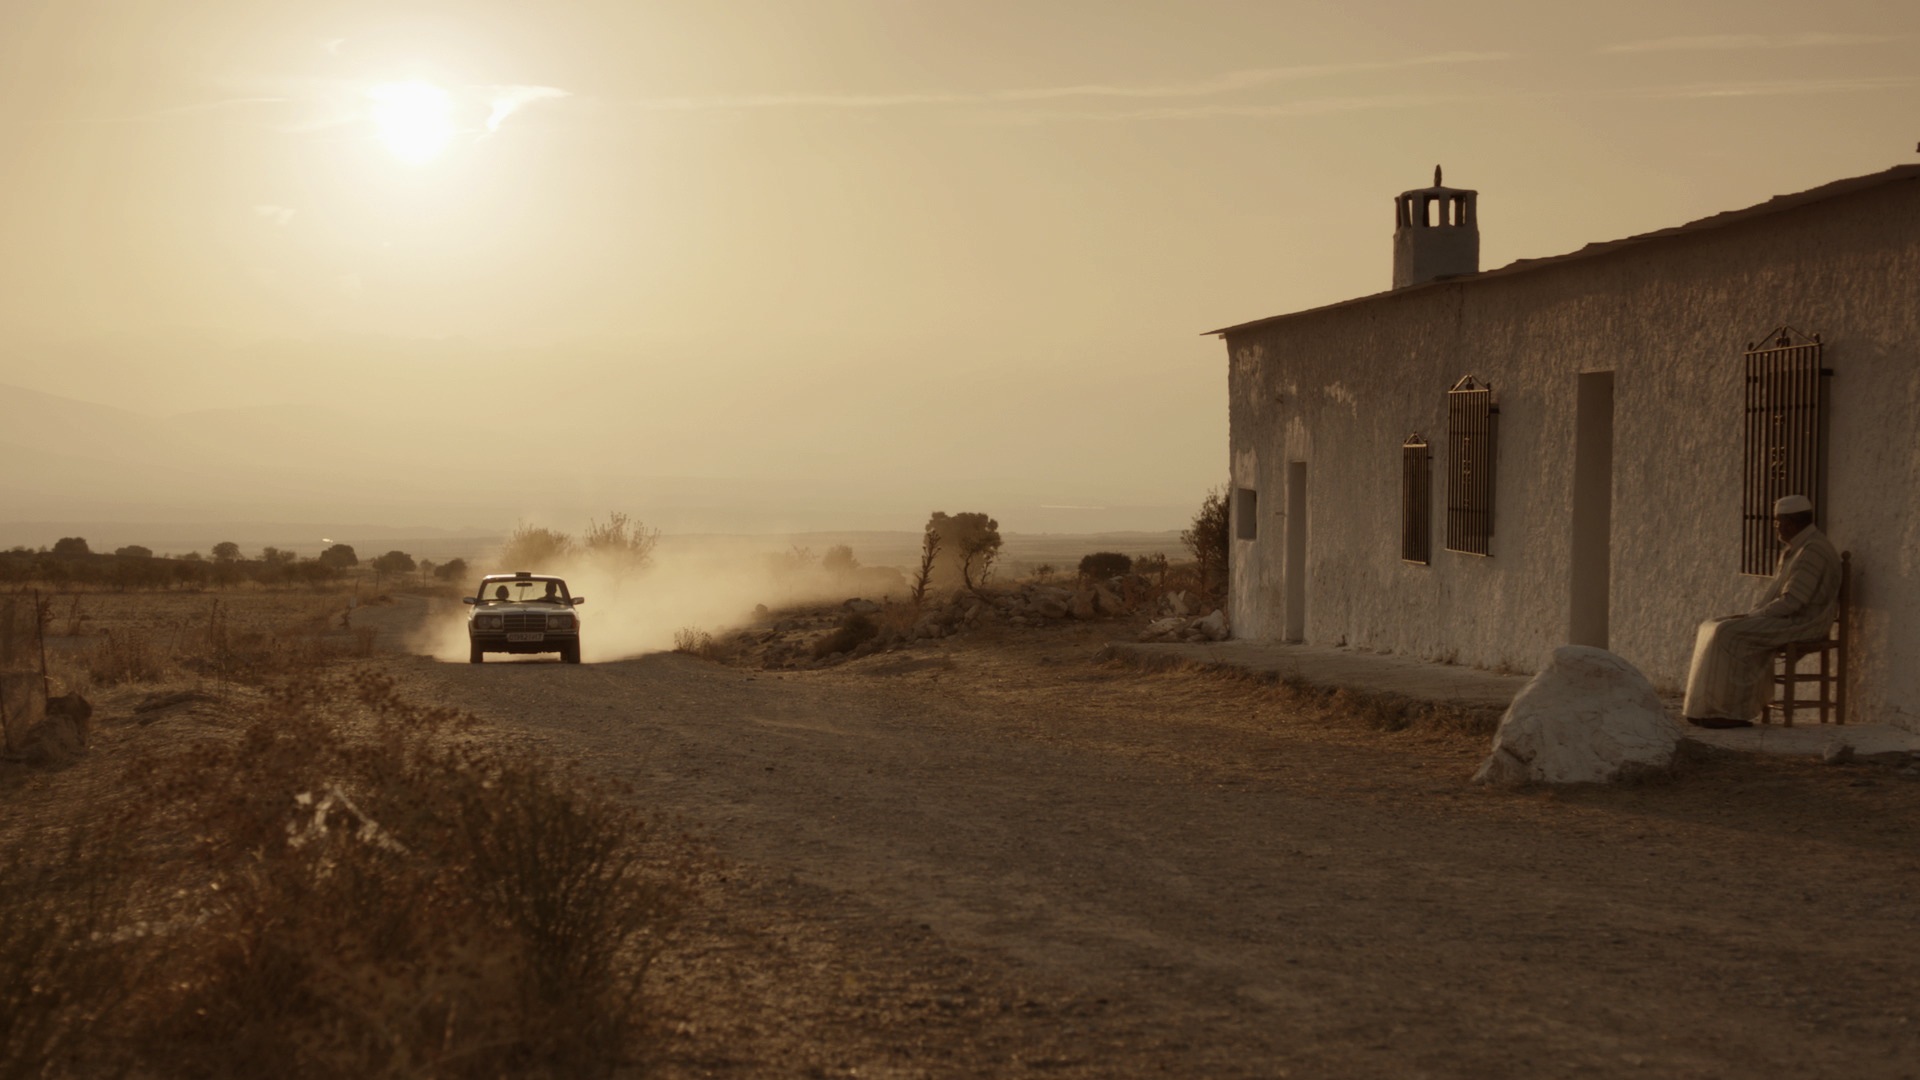 A Place in the Sun. Based on novel by Liza Marklund. On location i Spain & Morocco.